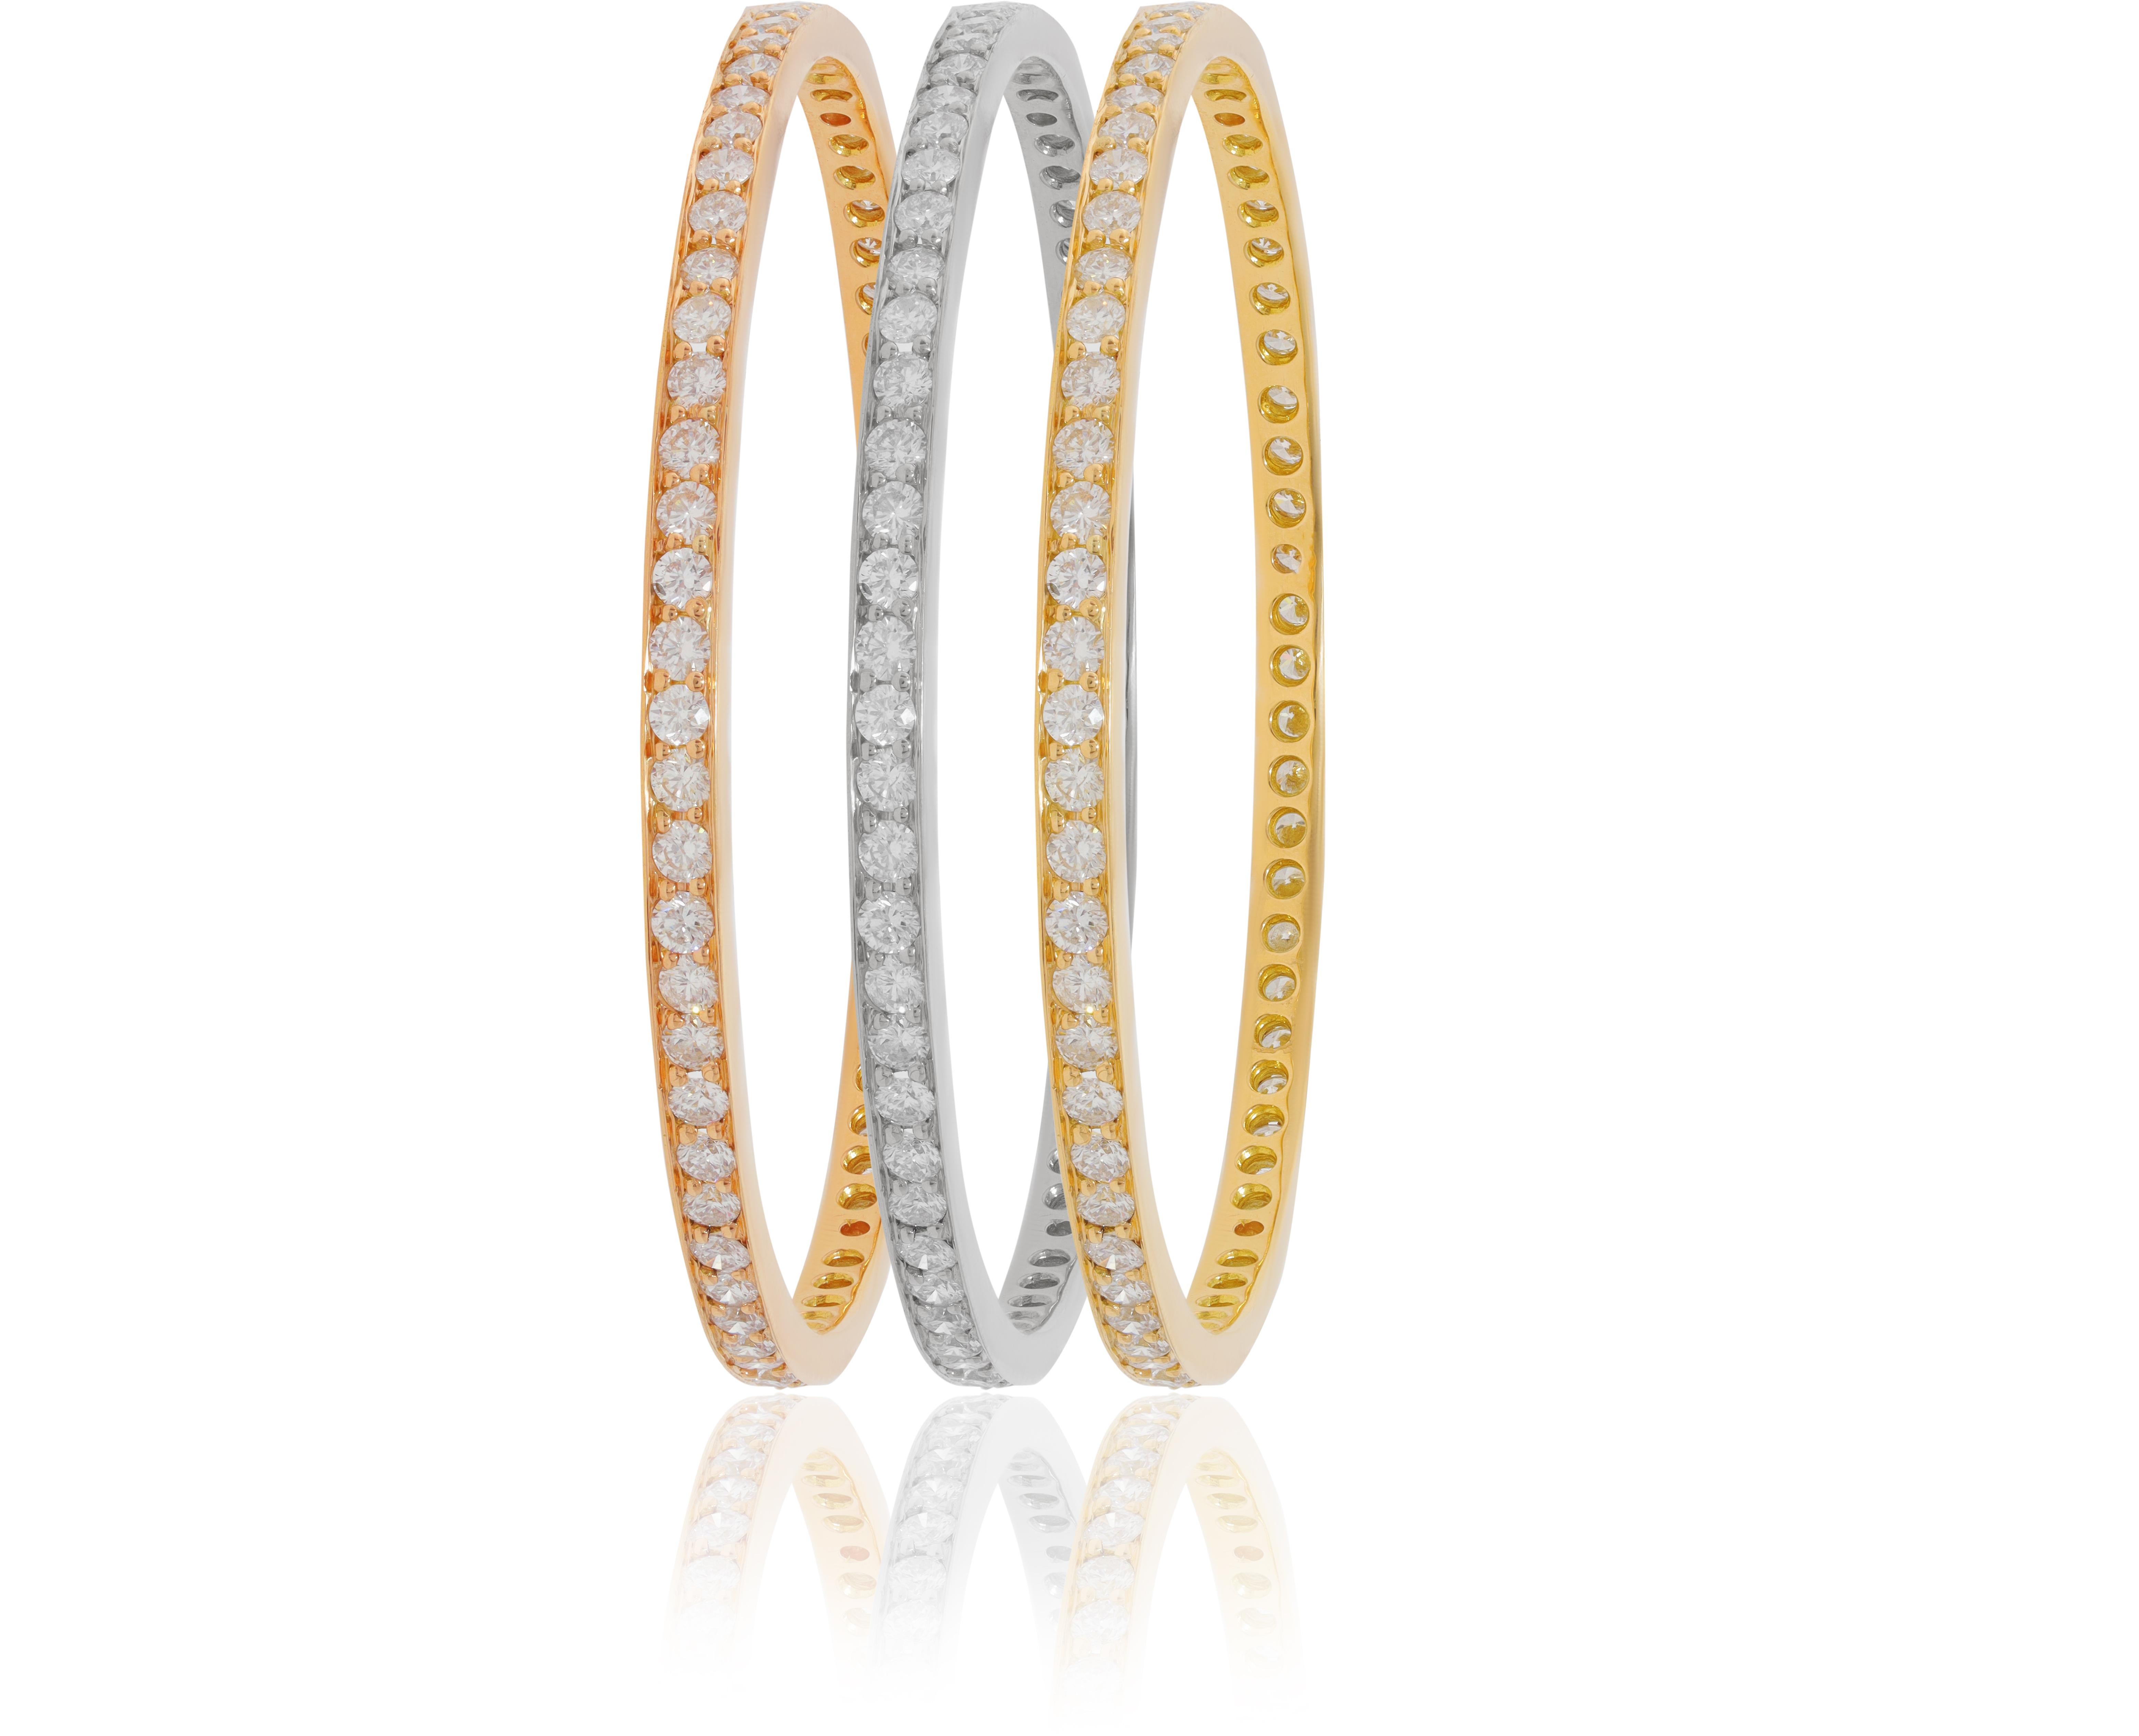 Modern Diana M. Tri-color set of white, yellow, and rose gold bangles adorned with 23ct For Sale